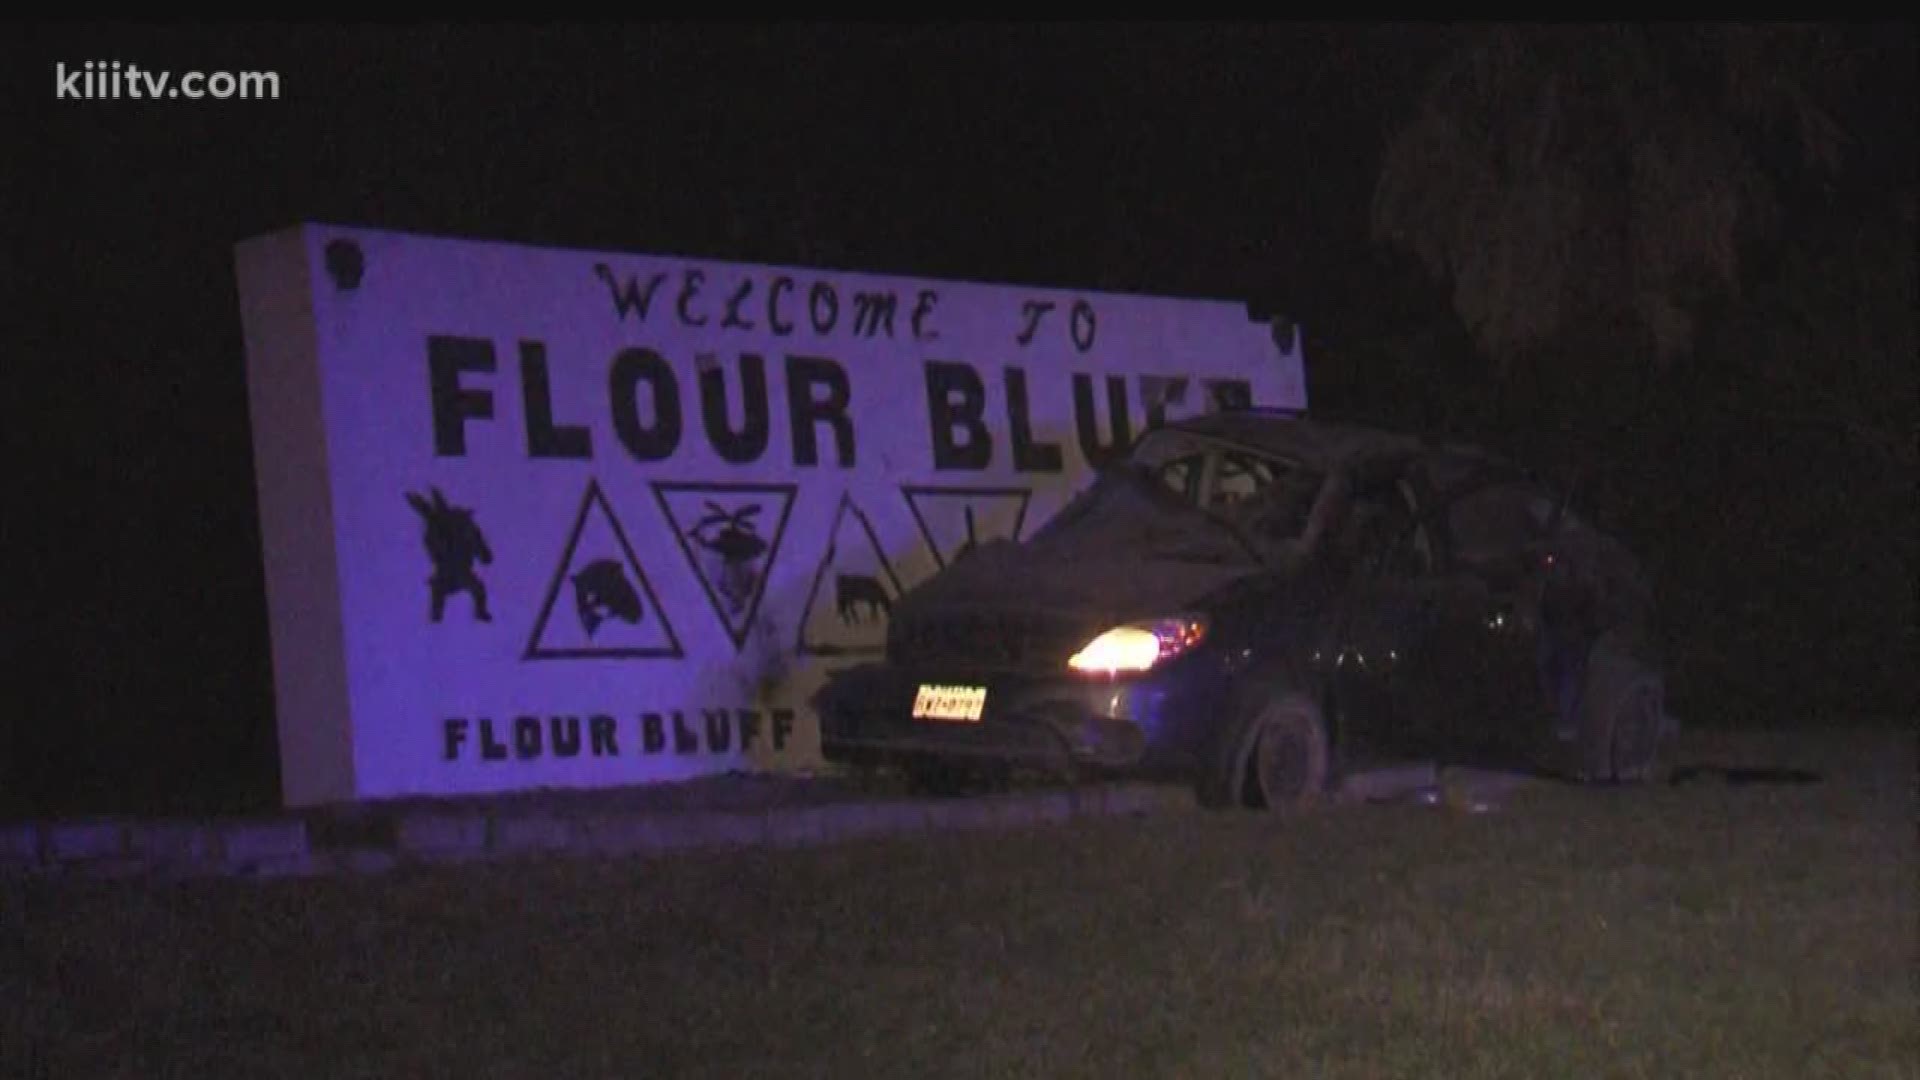 Just after 5:30 a.m. officers responded to an accident just off the Flour Bluff exit, when a man lost control of his car and hit the welcome sign. 